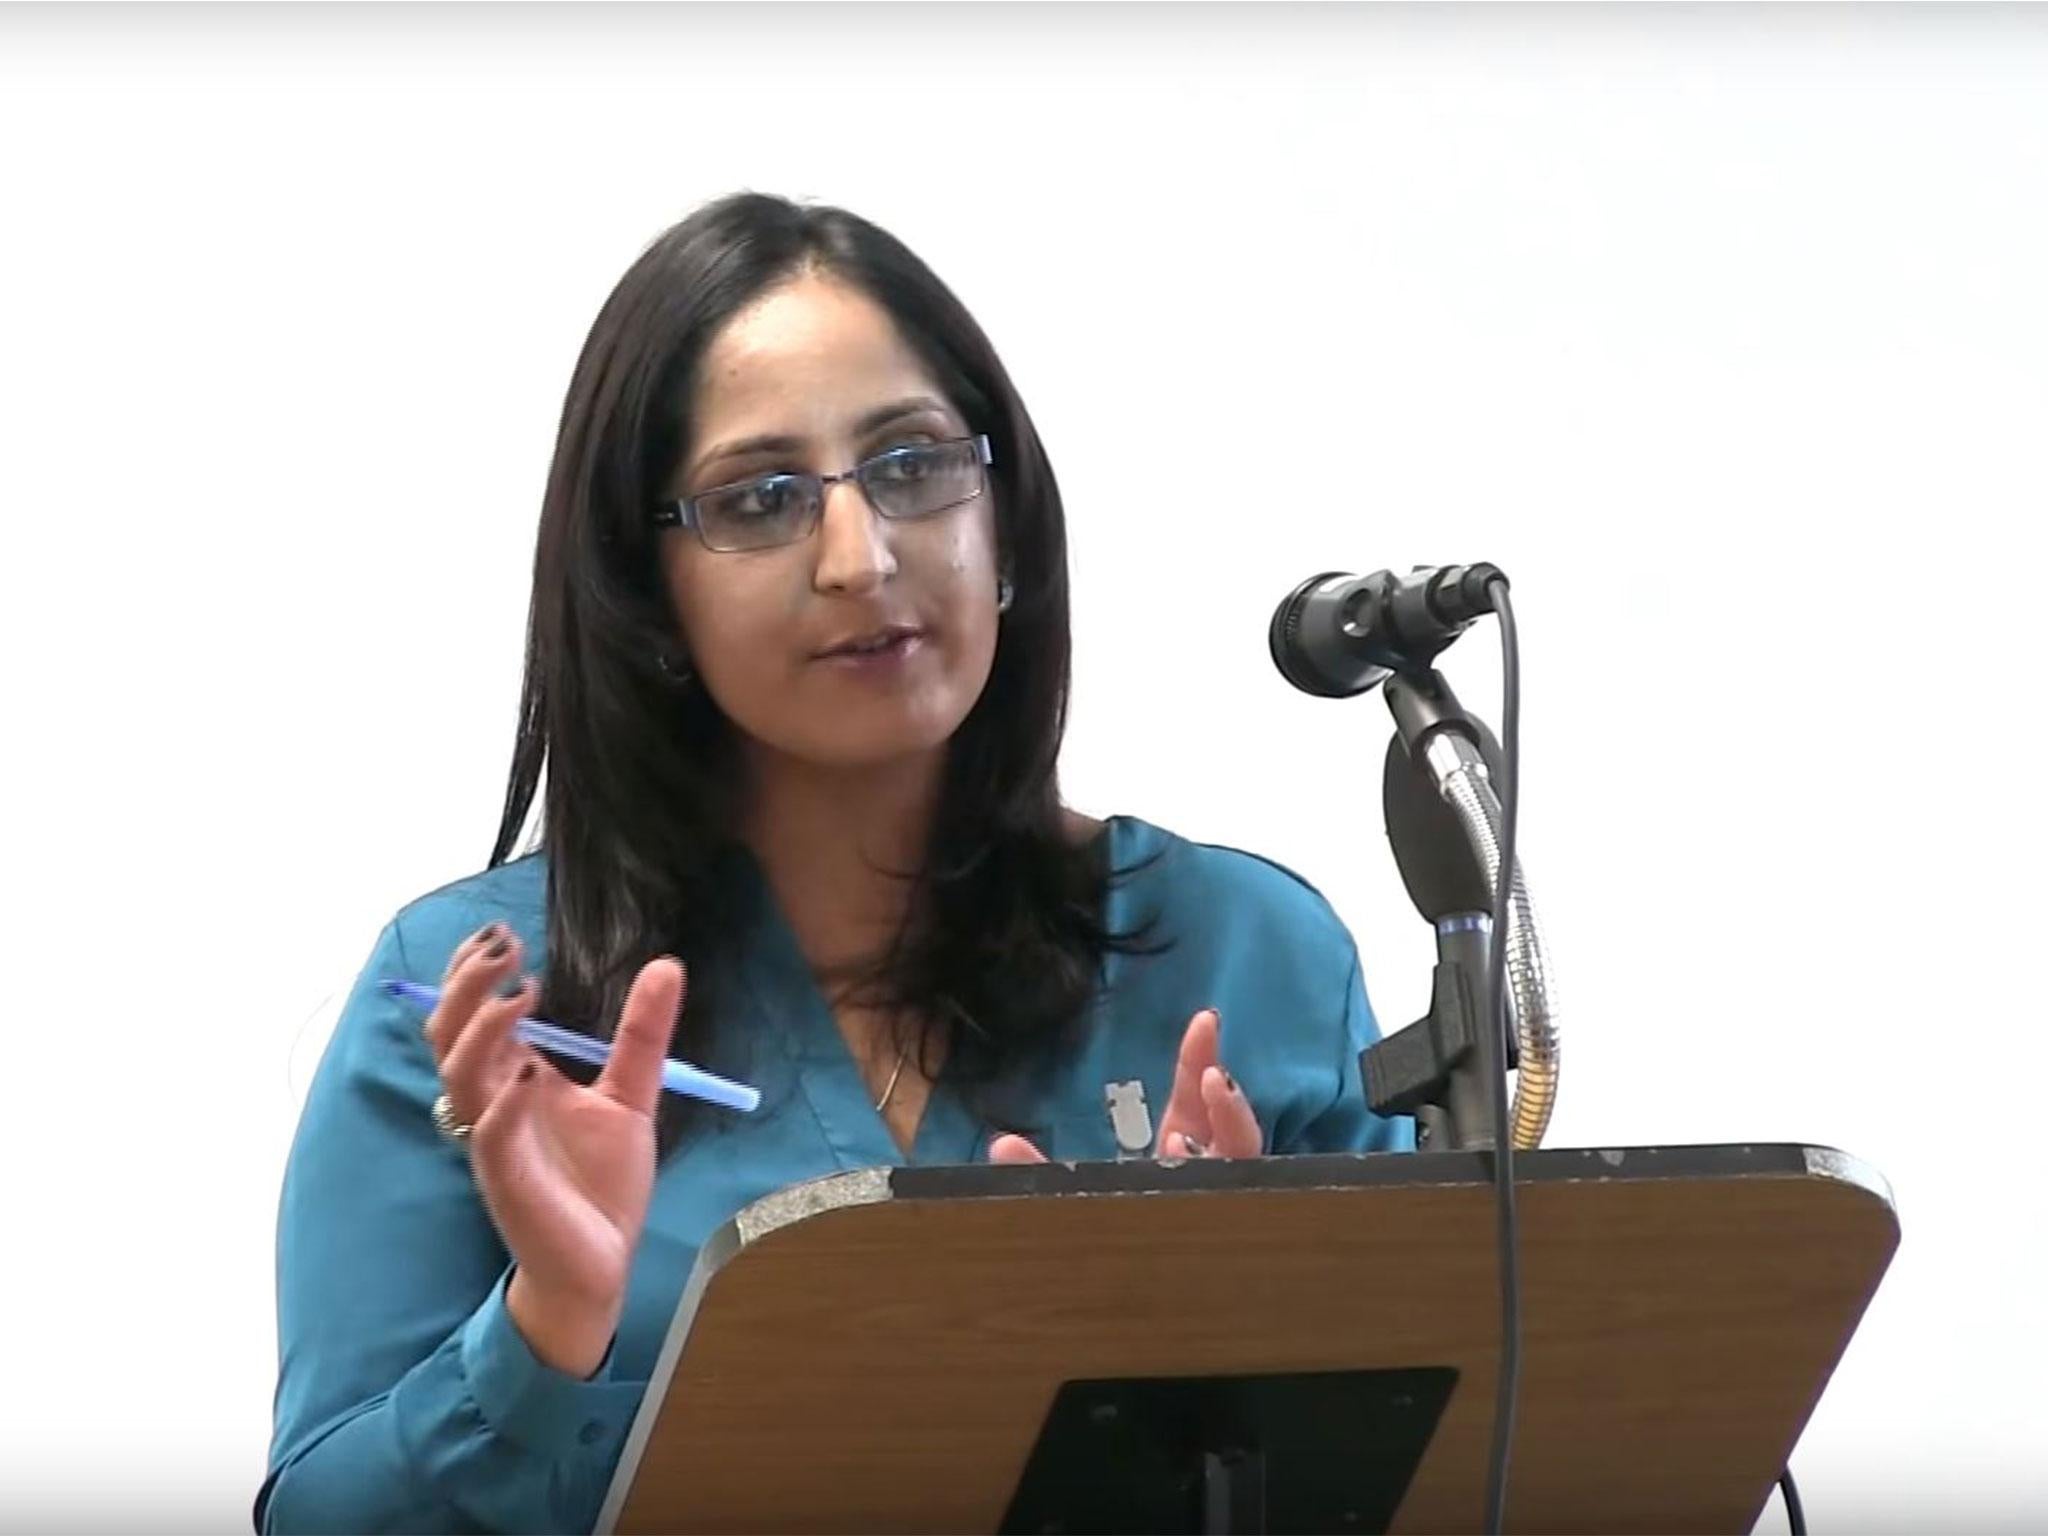 Aliyah Saleem, 27, speaking at the Secular Conference on British faith schools